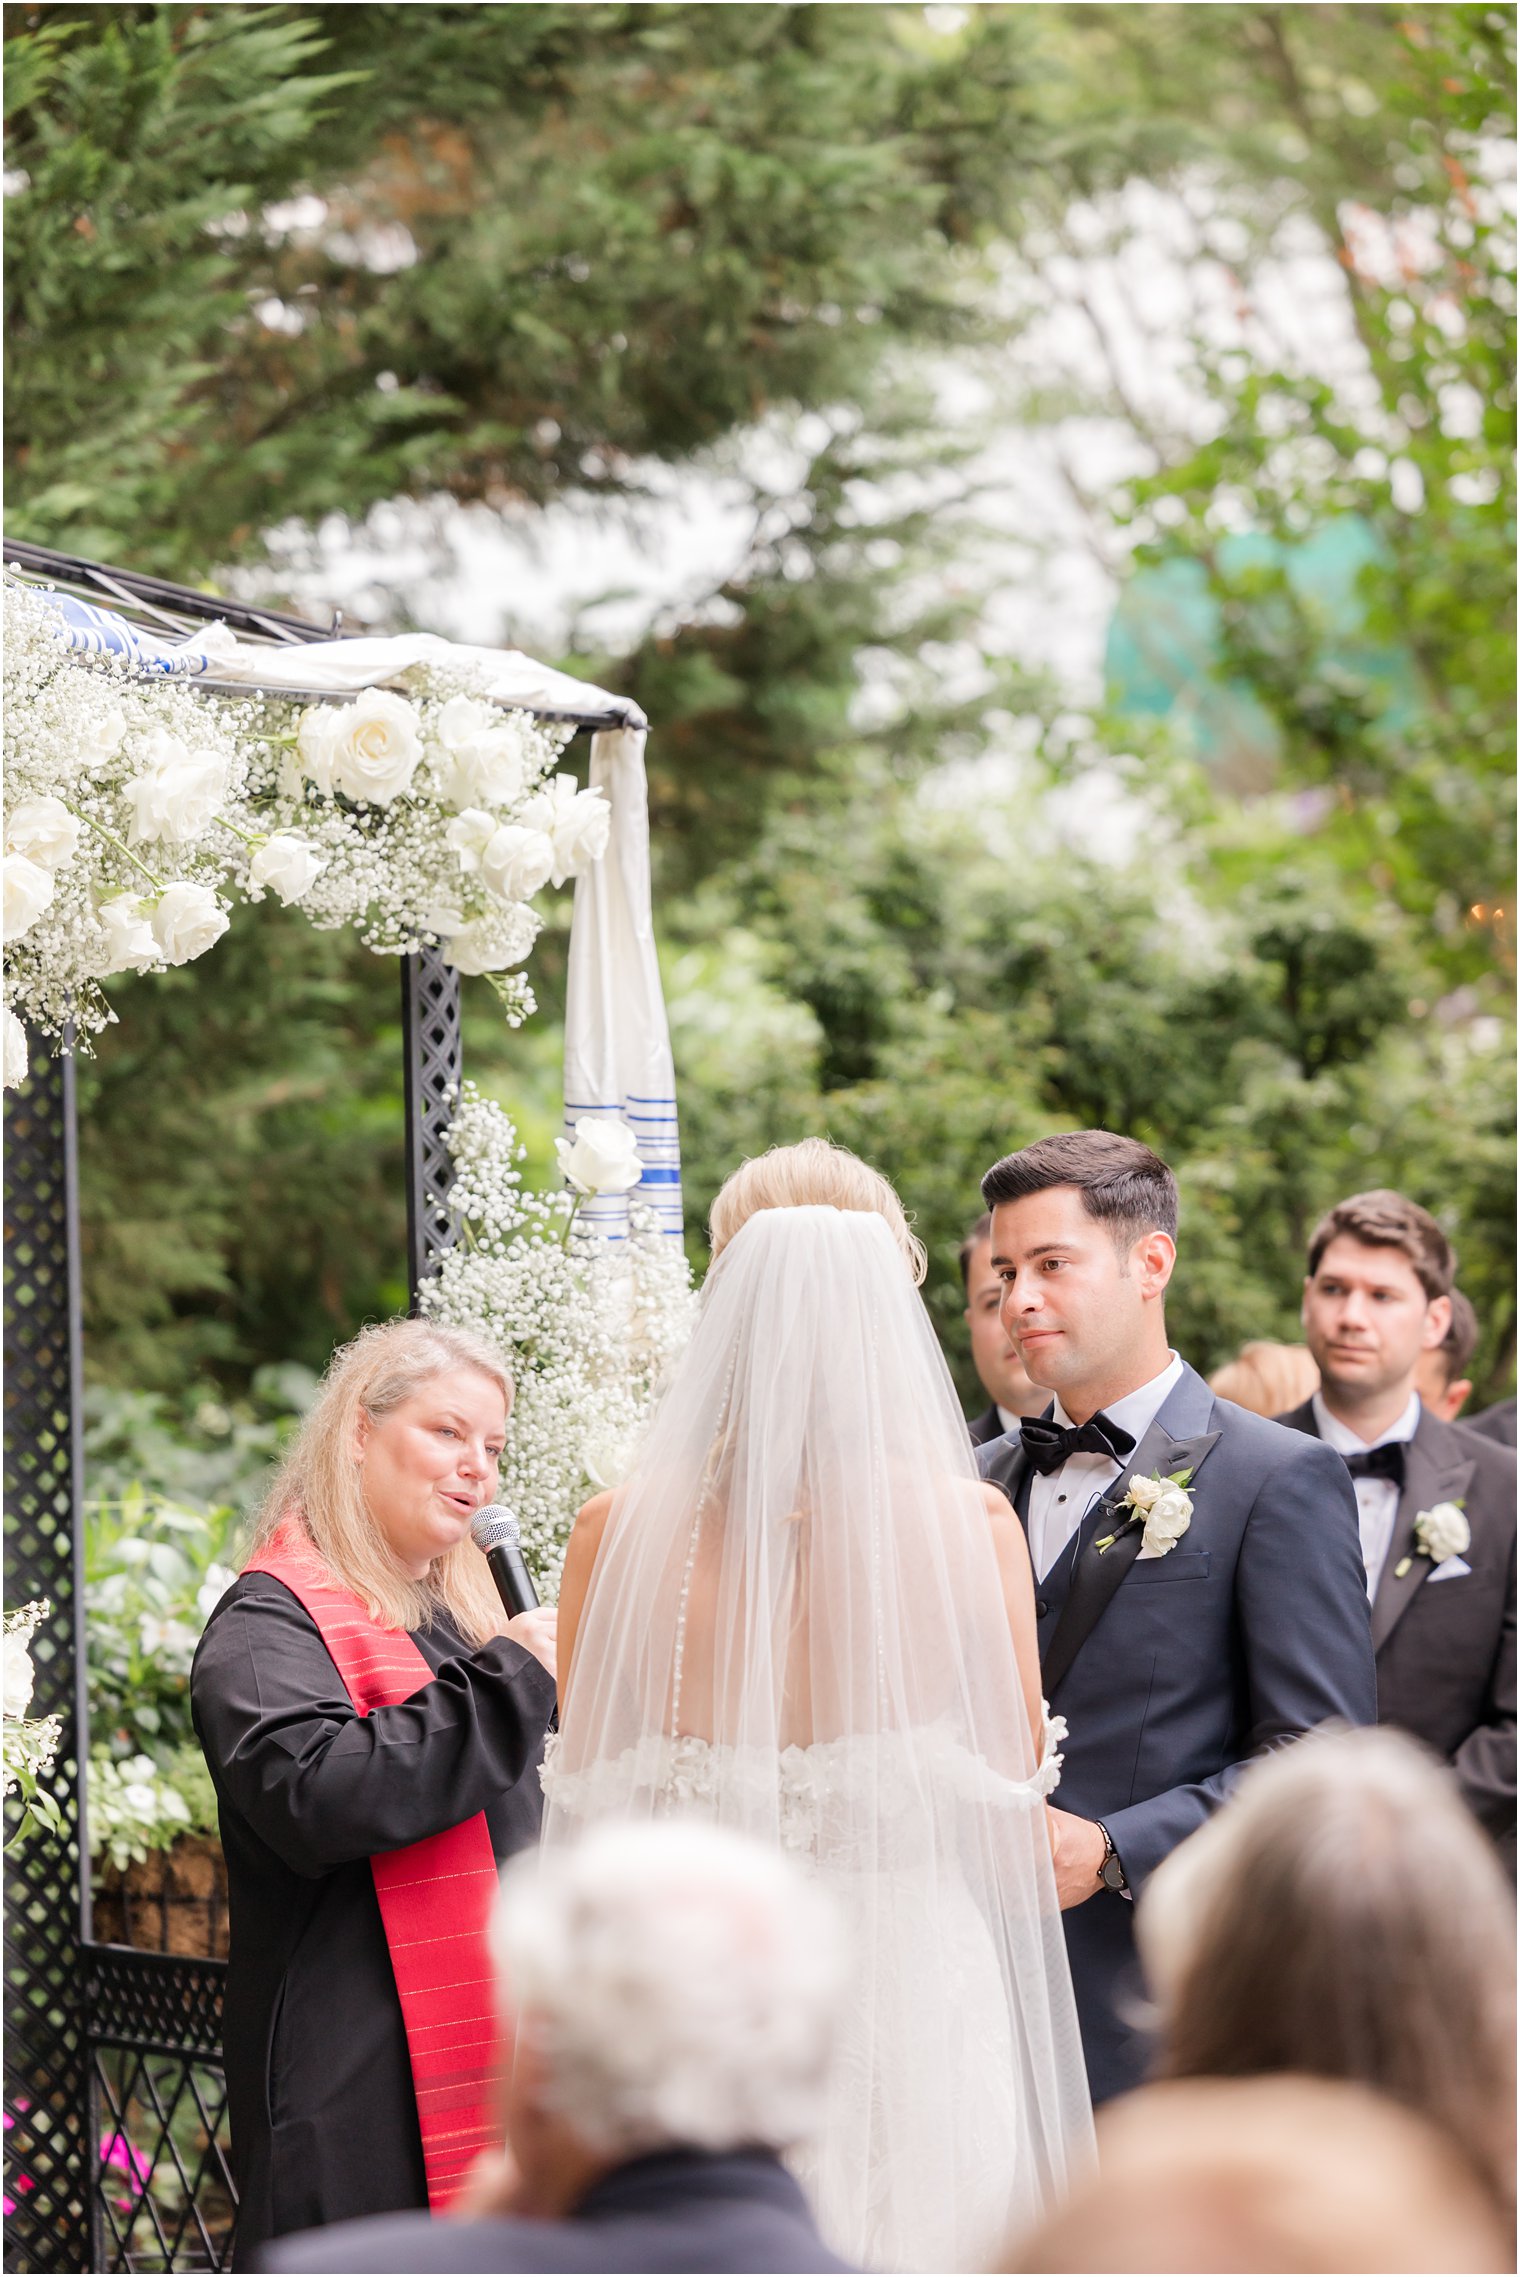 officiant speaks to bride and groom during Jewish wedding ceremony in garden 